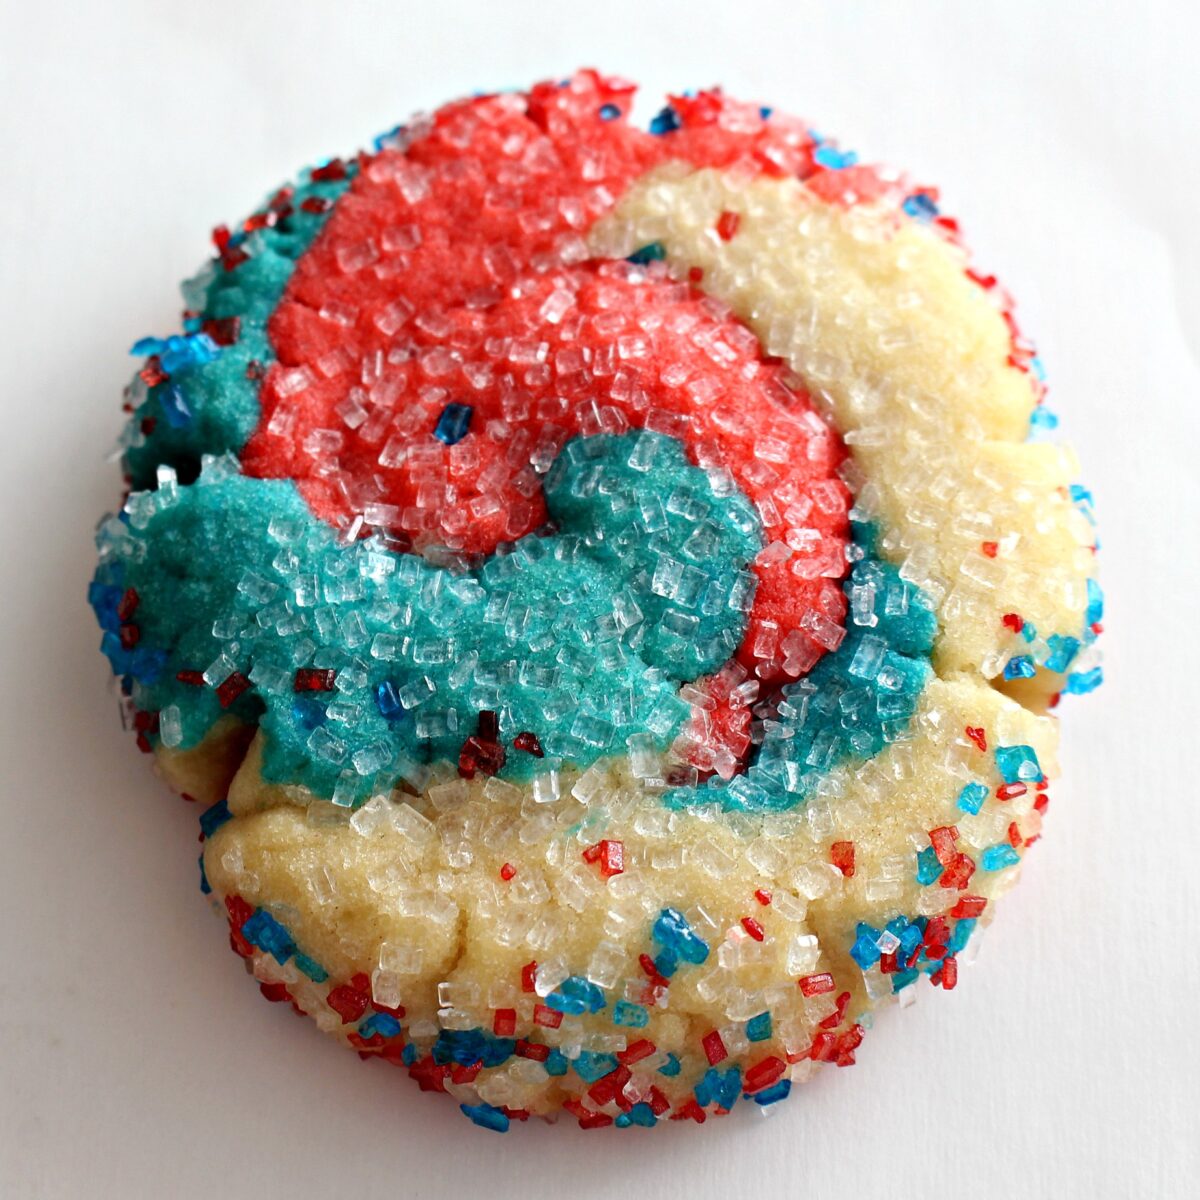 Closeup of a red, white, and blue sugar cookie coated in decorating sugar.